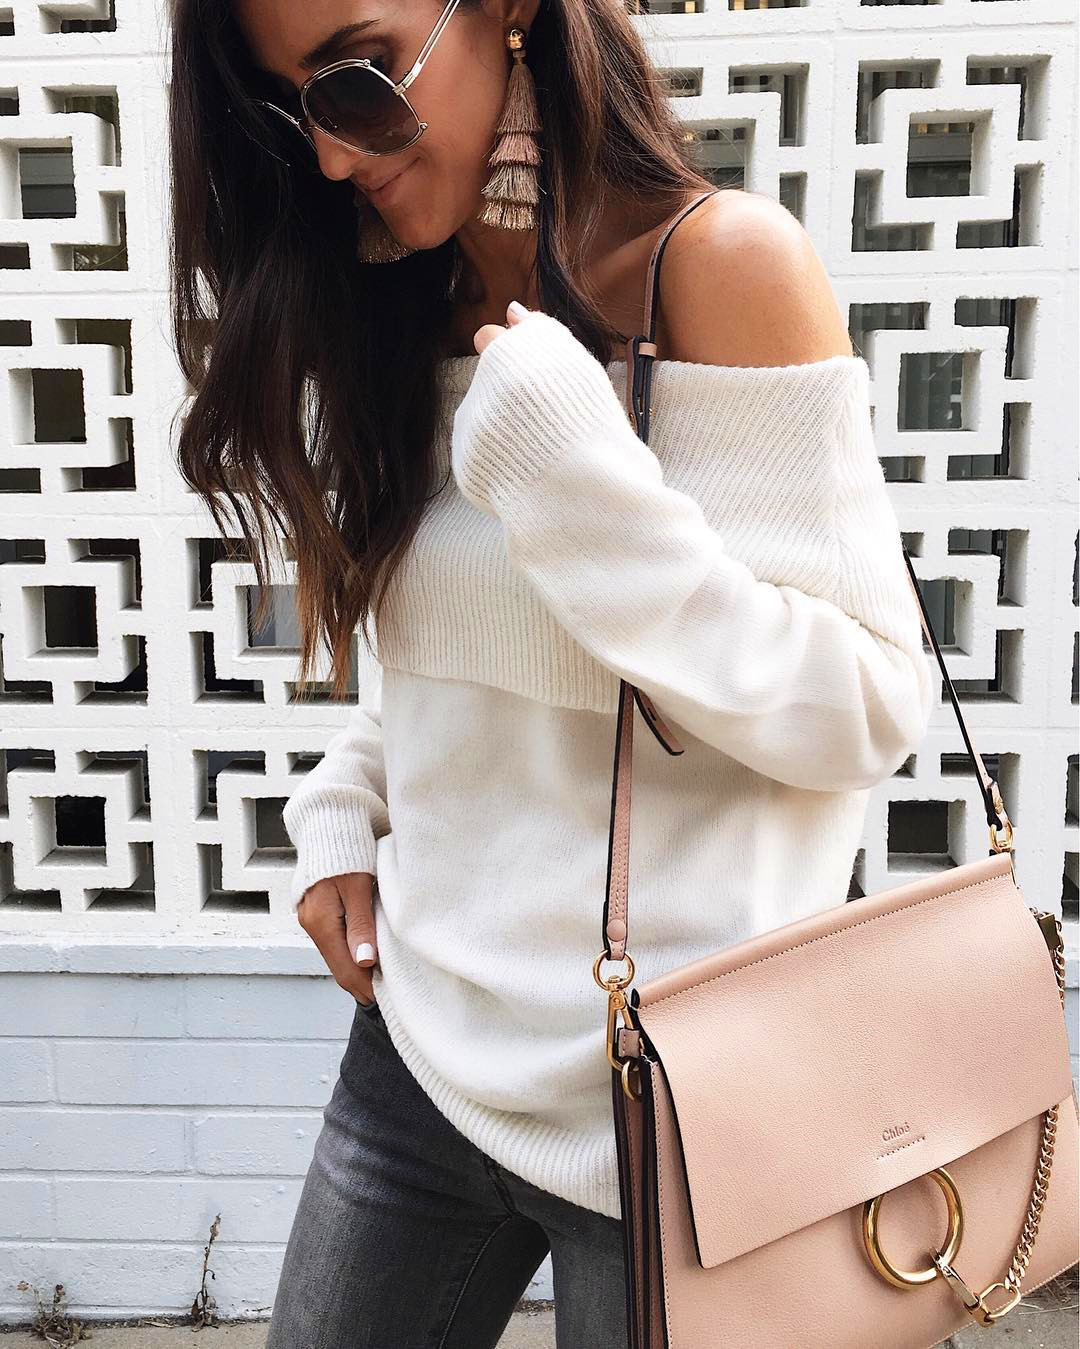 50+ Glamorous Fall Outfits To Inspire Yourself